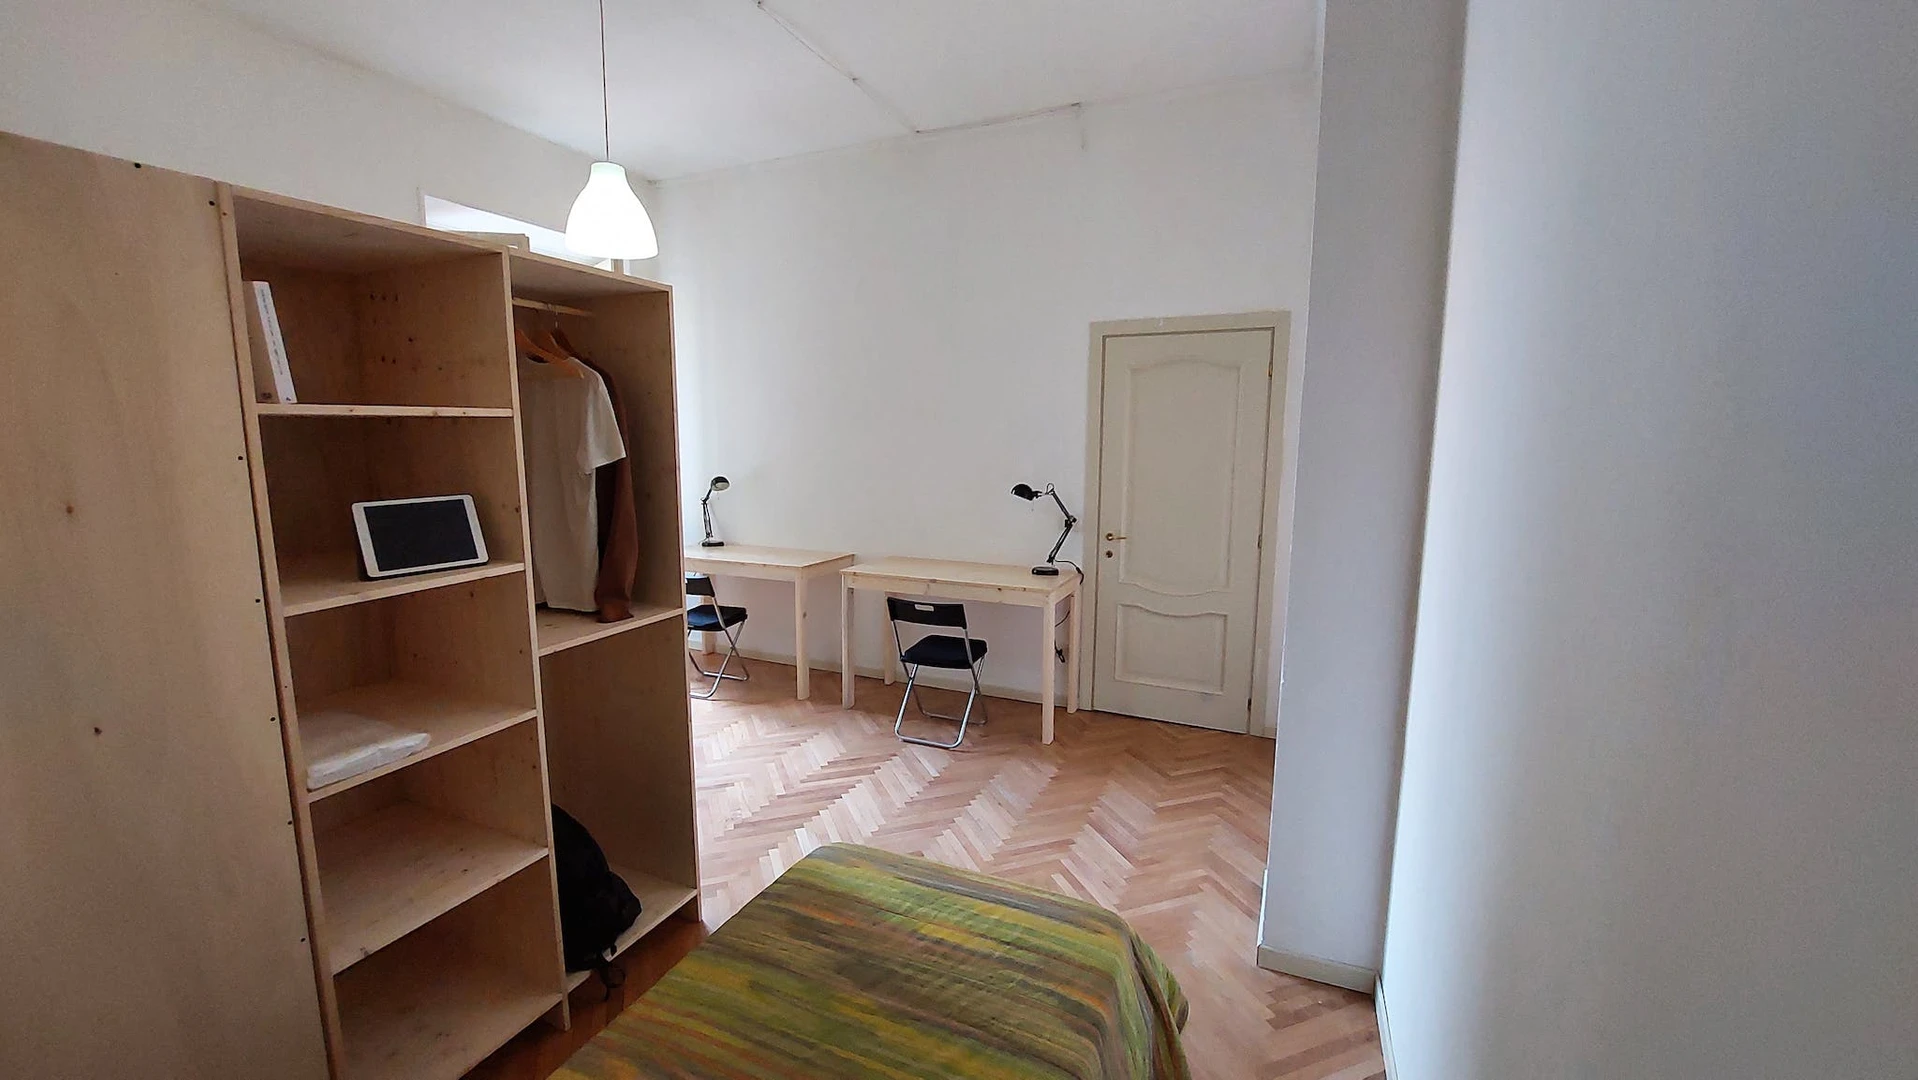 Shared room in 3-bedroom flat parma